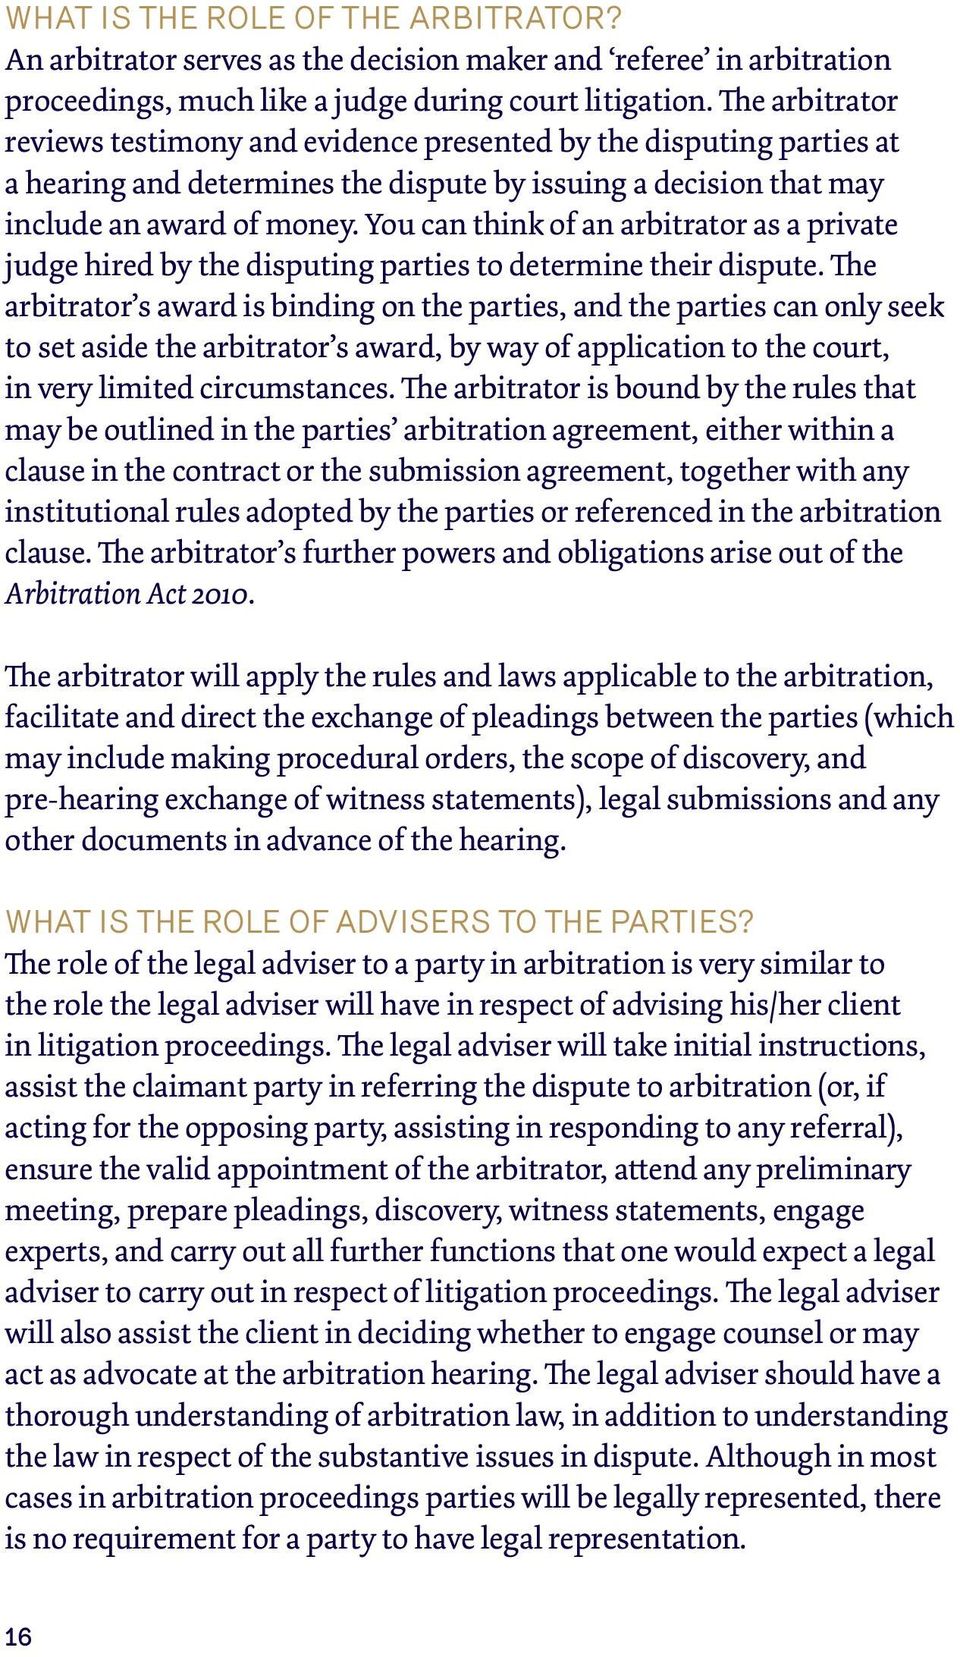 You can think of an arbitrator as a private judge hired by the disputing parties to determine their dispute.